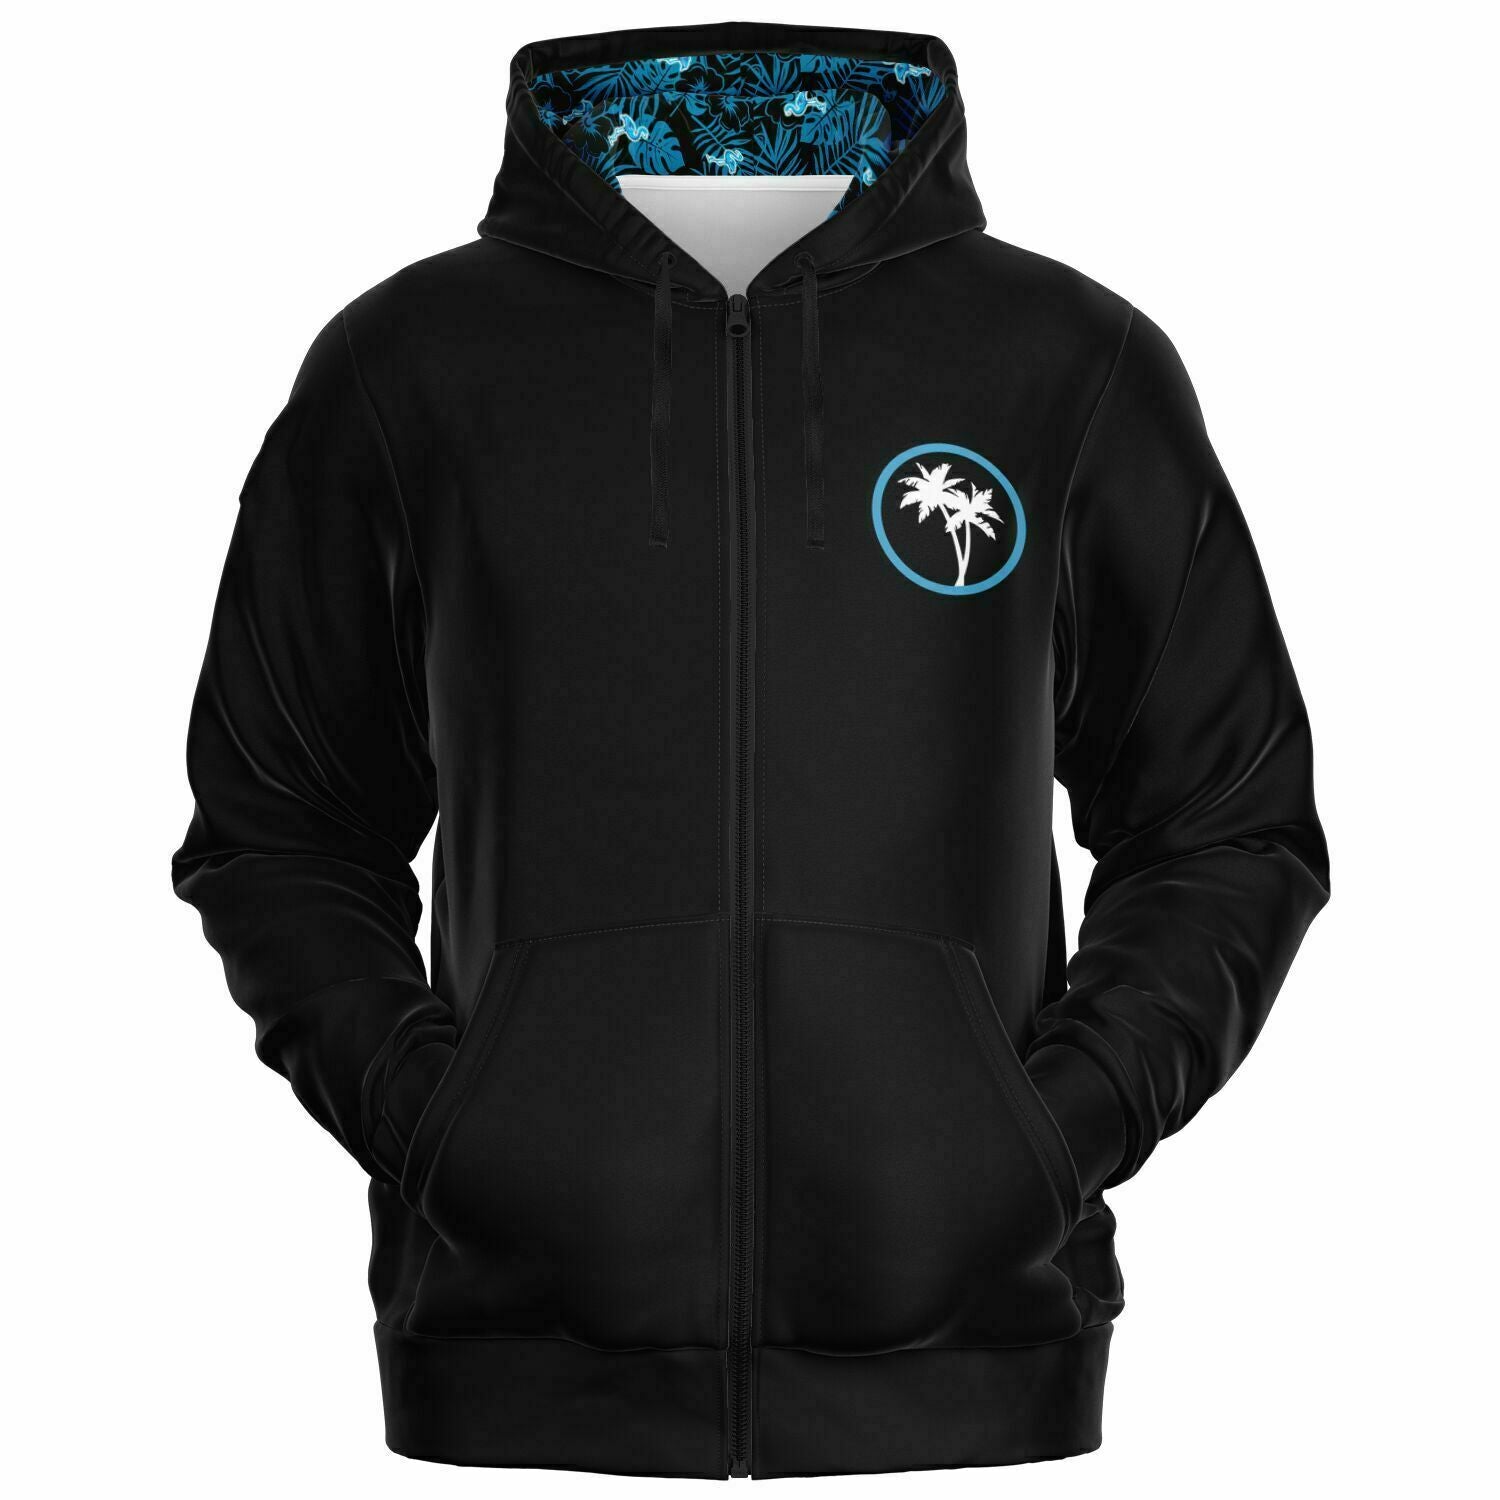 Rad Palm Icon Party Like A Flock Star Zip Up Hoodie